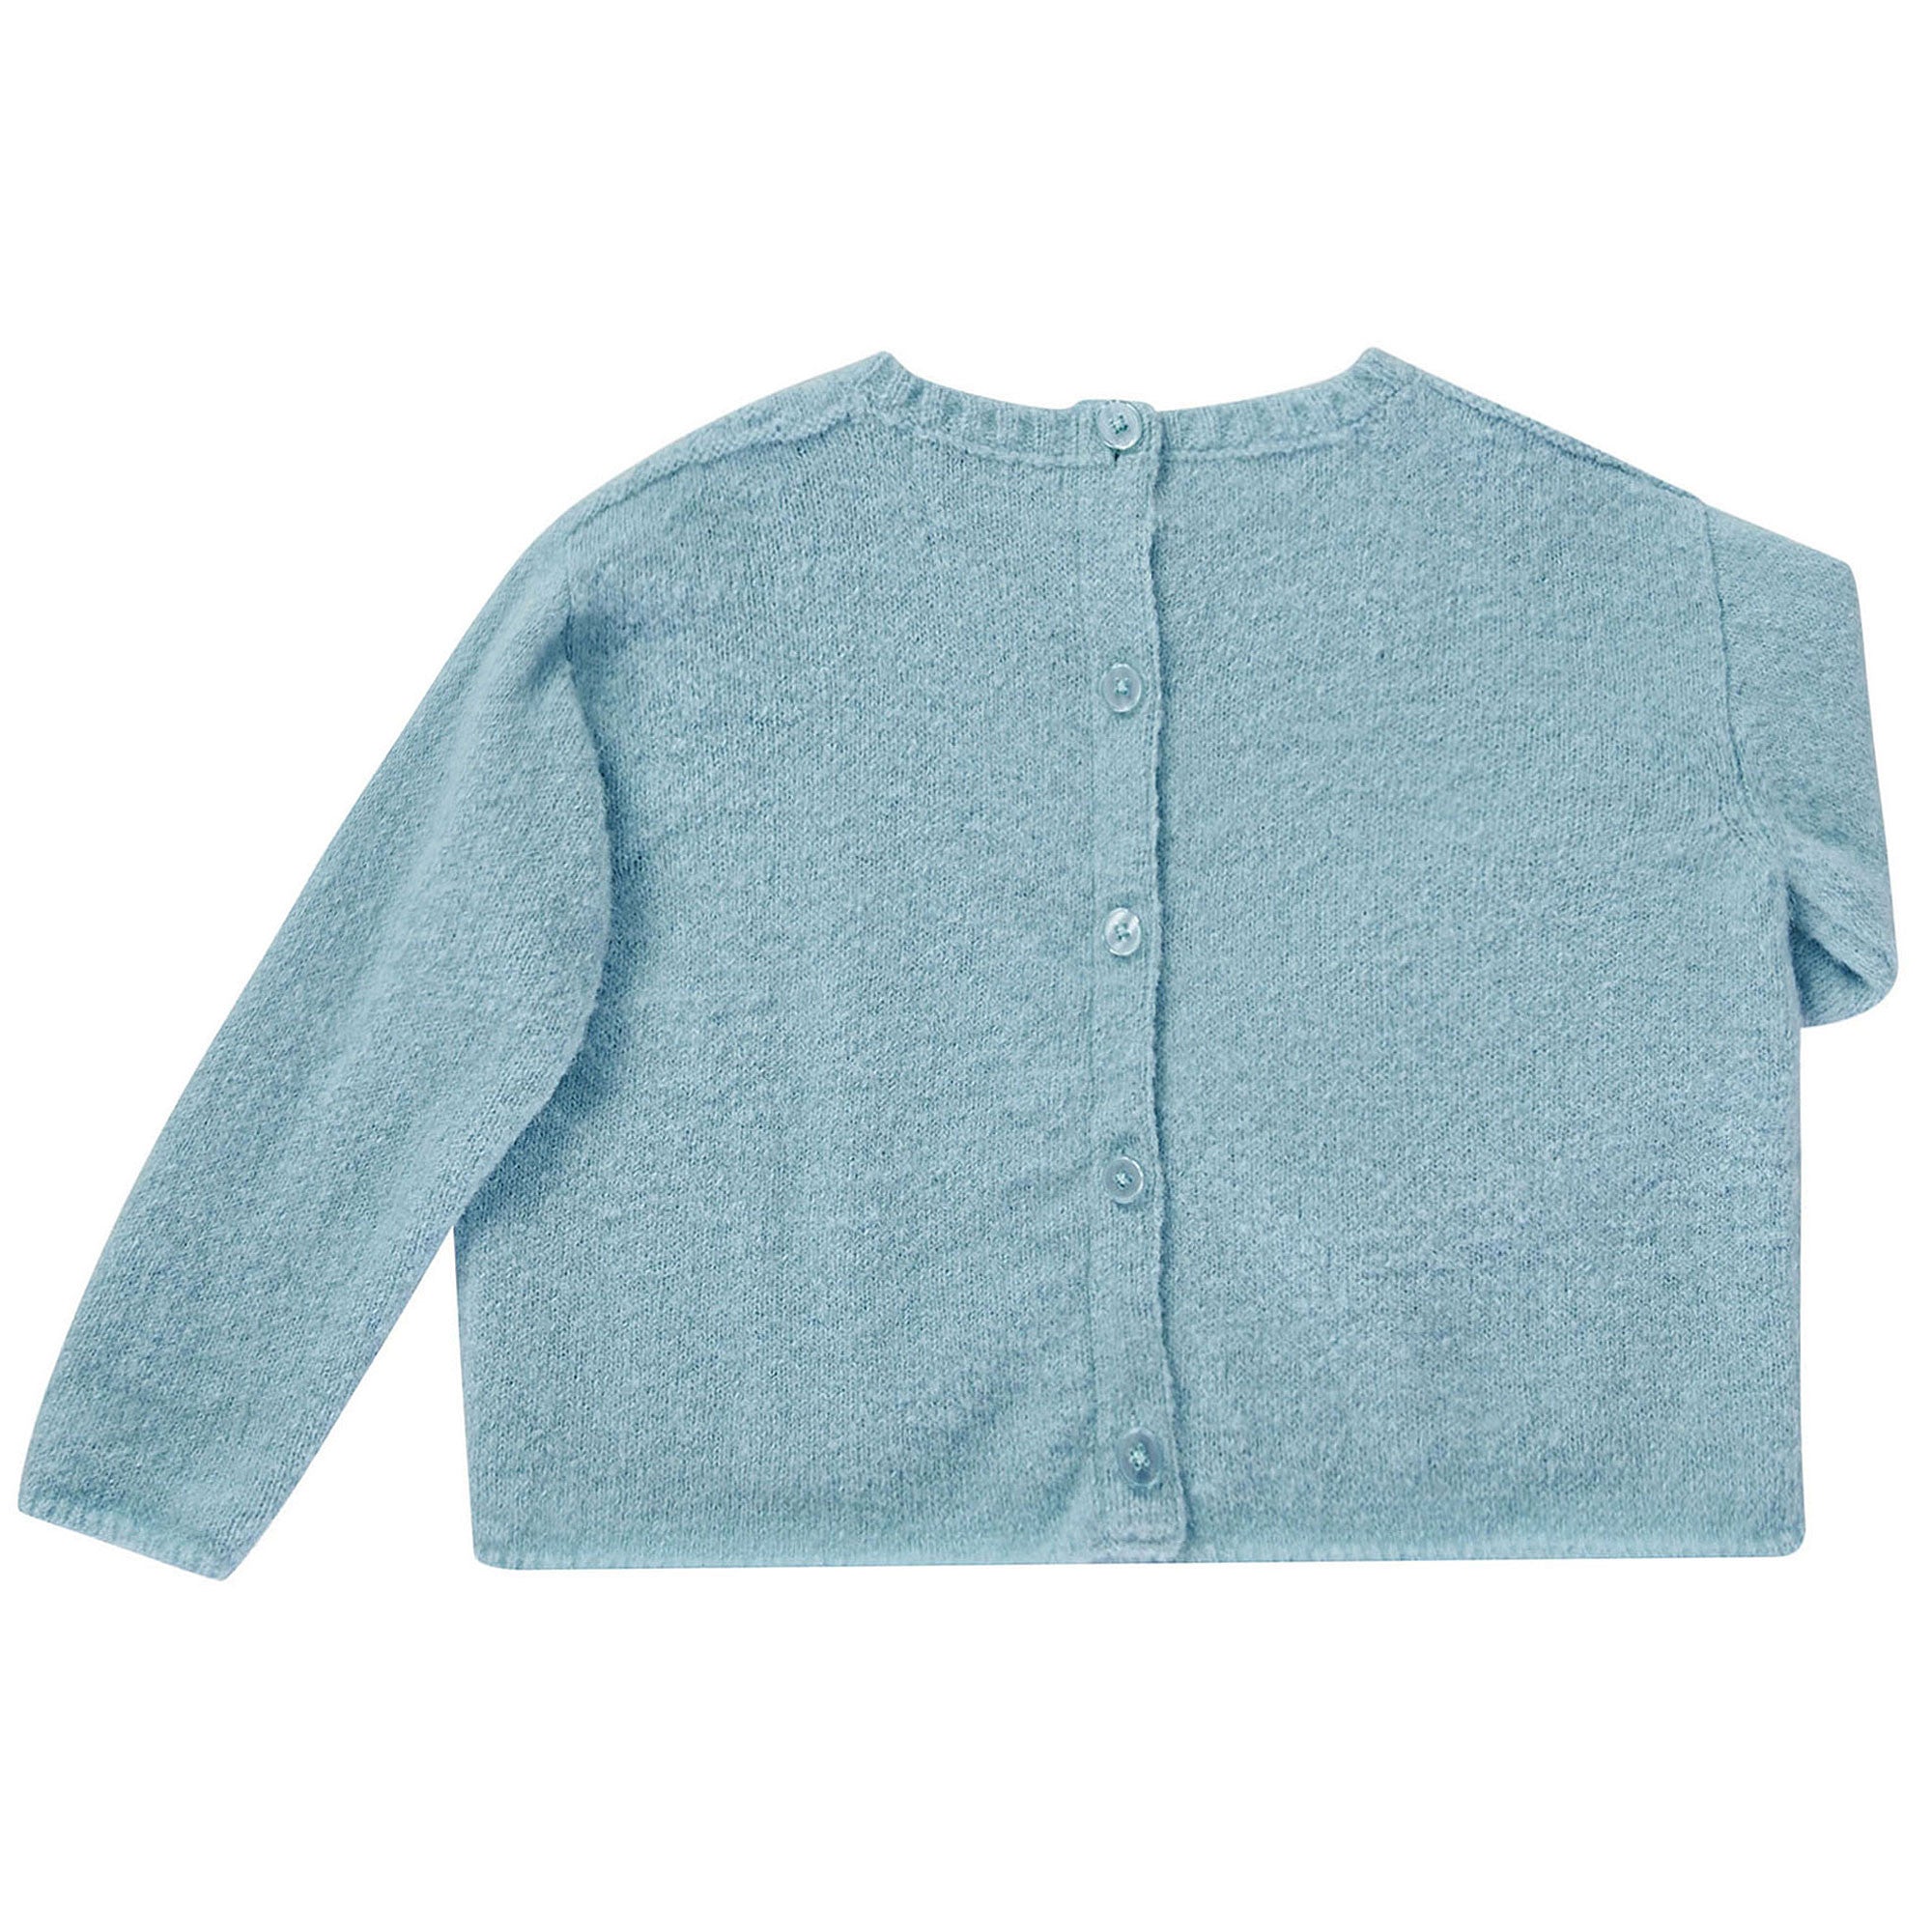 Boys Ice Blue Low Ribbed Knitted Sweater - CÉMAROSE | Children's Fashion Store - 2